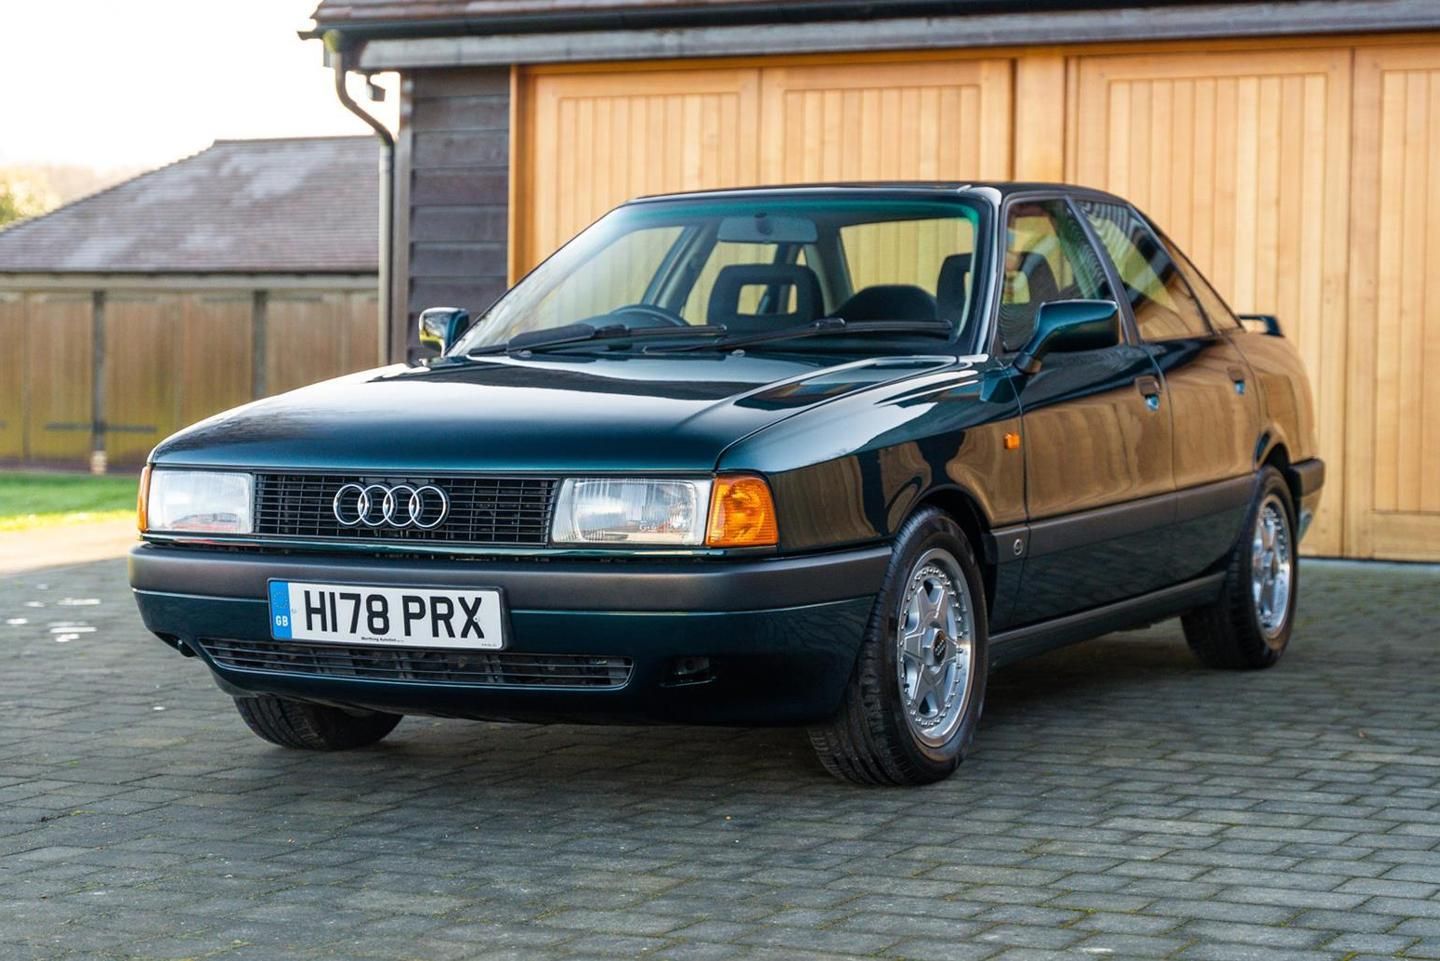 The Audi 80… – Not £2 Grand